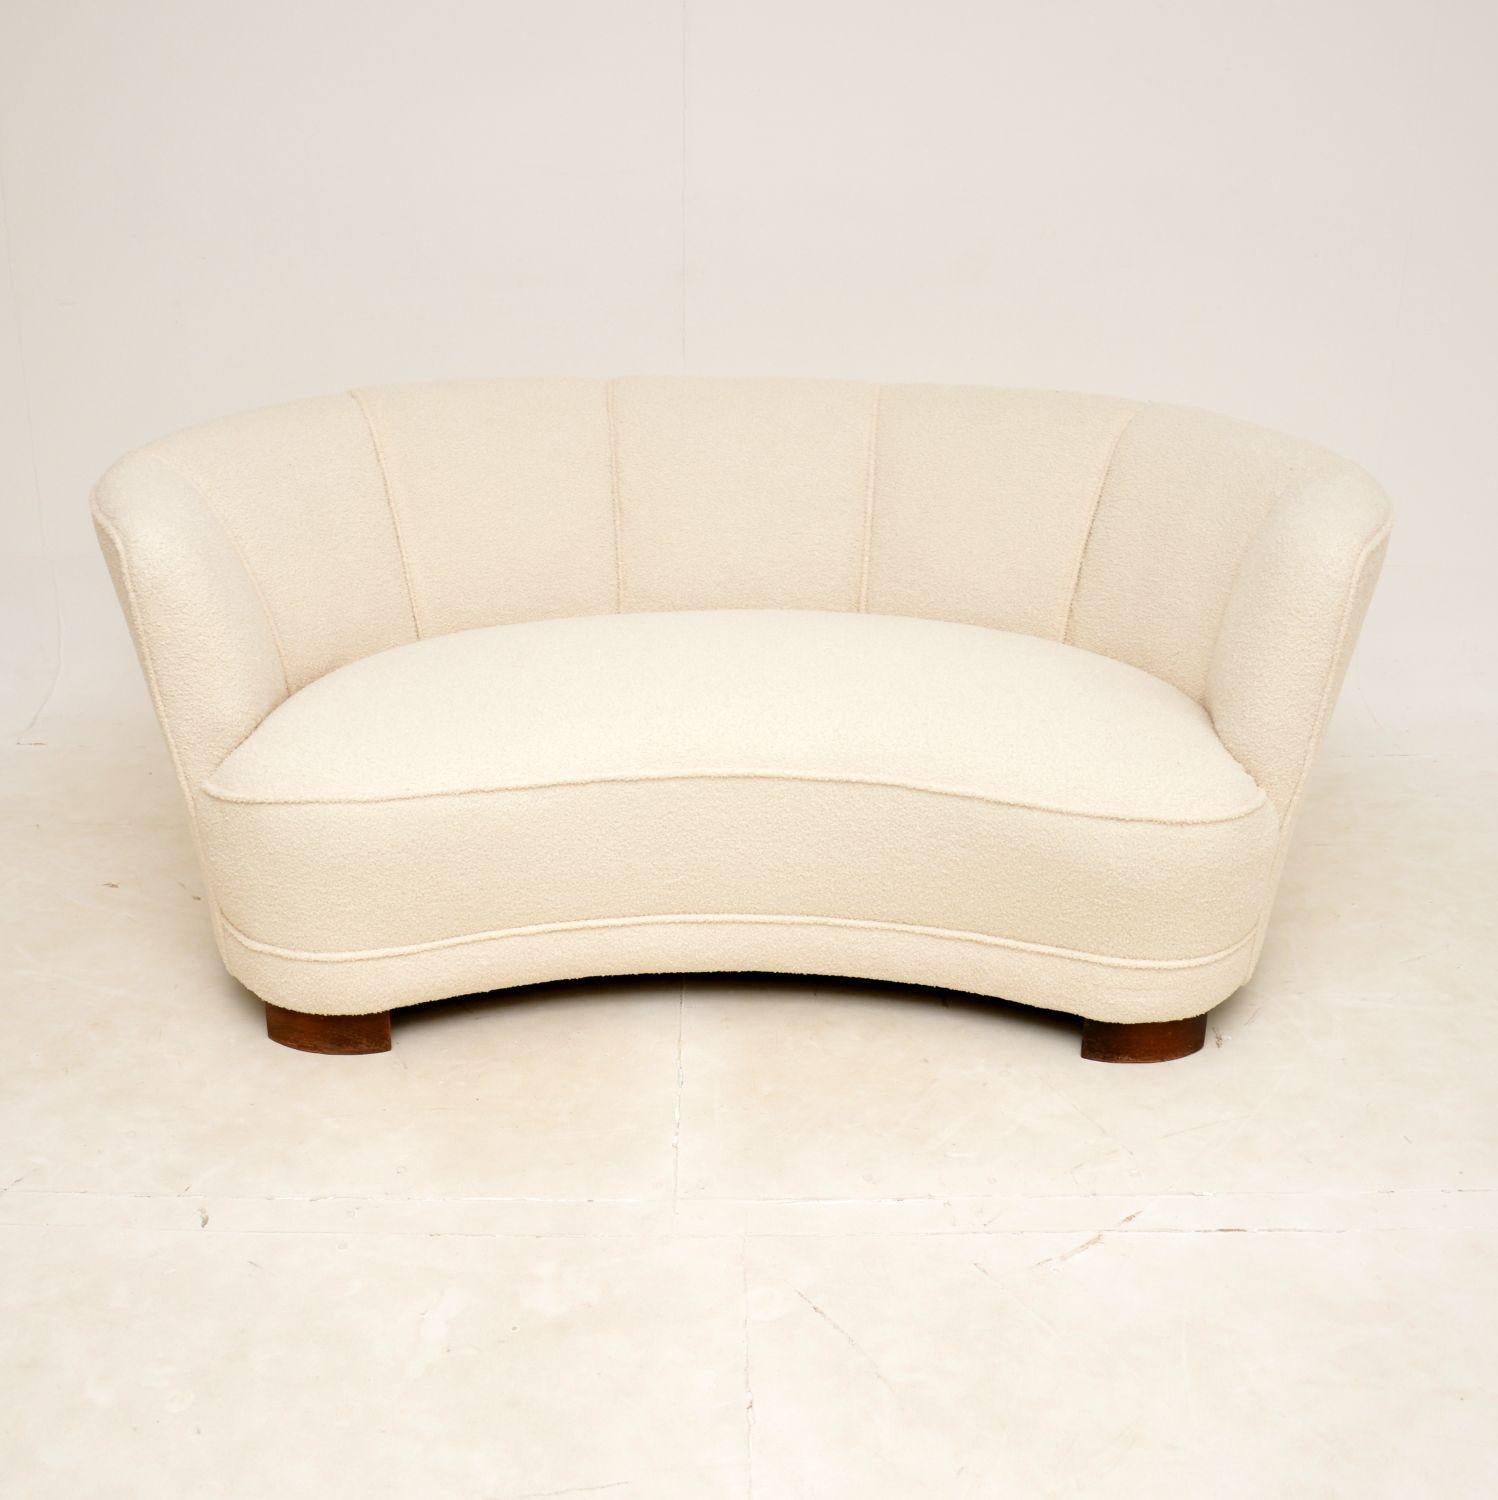 A fantastic vintage Danish curved banana cocktail sofa dating from the 1940’s. This was recently imported from Denmark.

This is of superb quality, it is very well built and very comfortable. It is a great size, comfortably seating two and it can